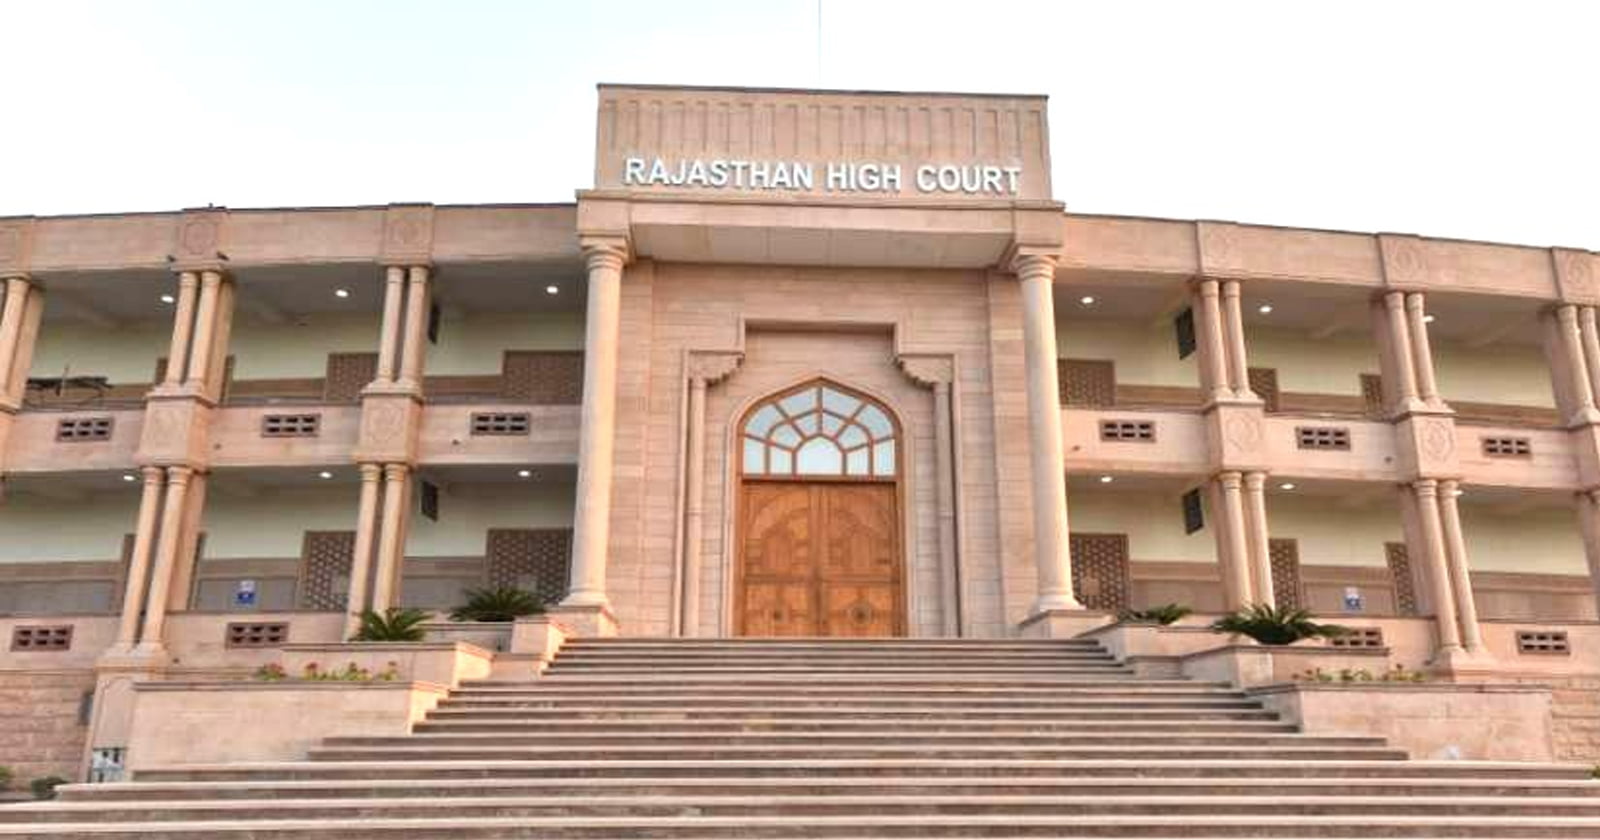 Rajasthan High Court - Rejection of Application - Re consider Application - Surplus generation - TAXSCAN